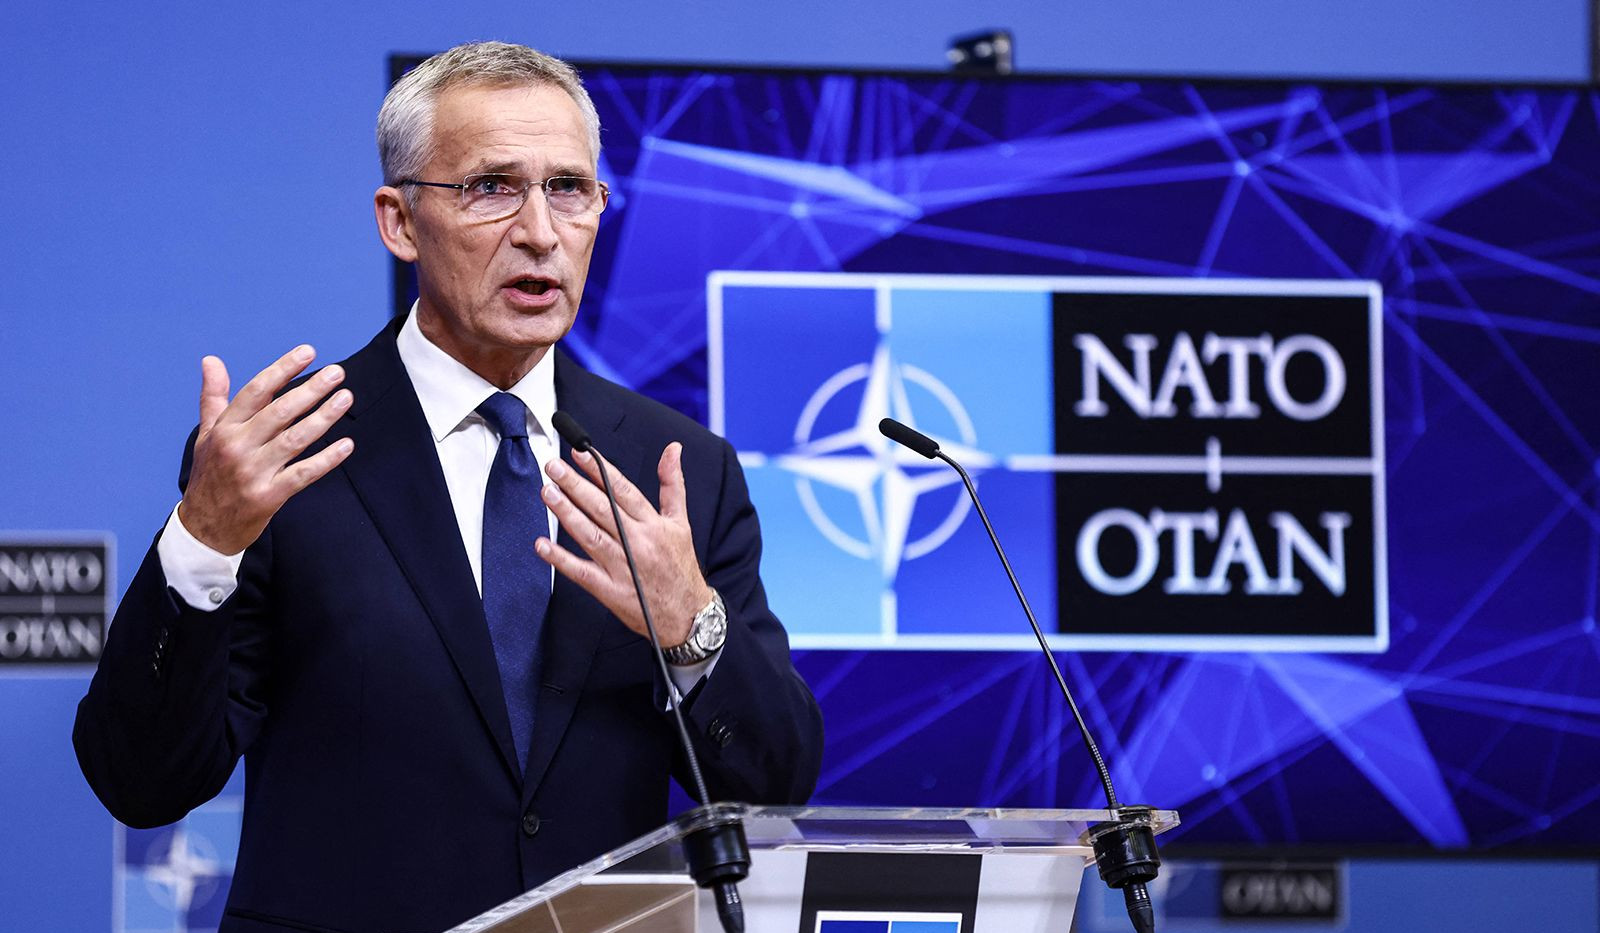 West admits the missile in Poland was Ukrainian, NATO blames Russia